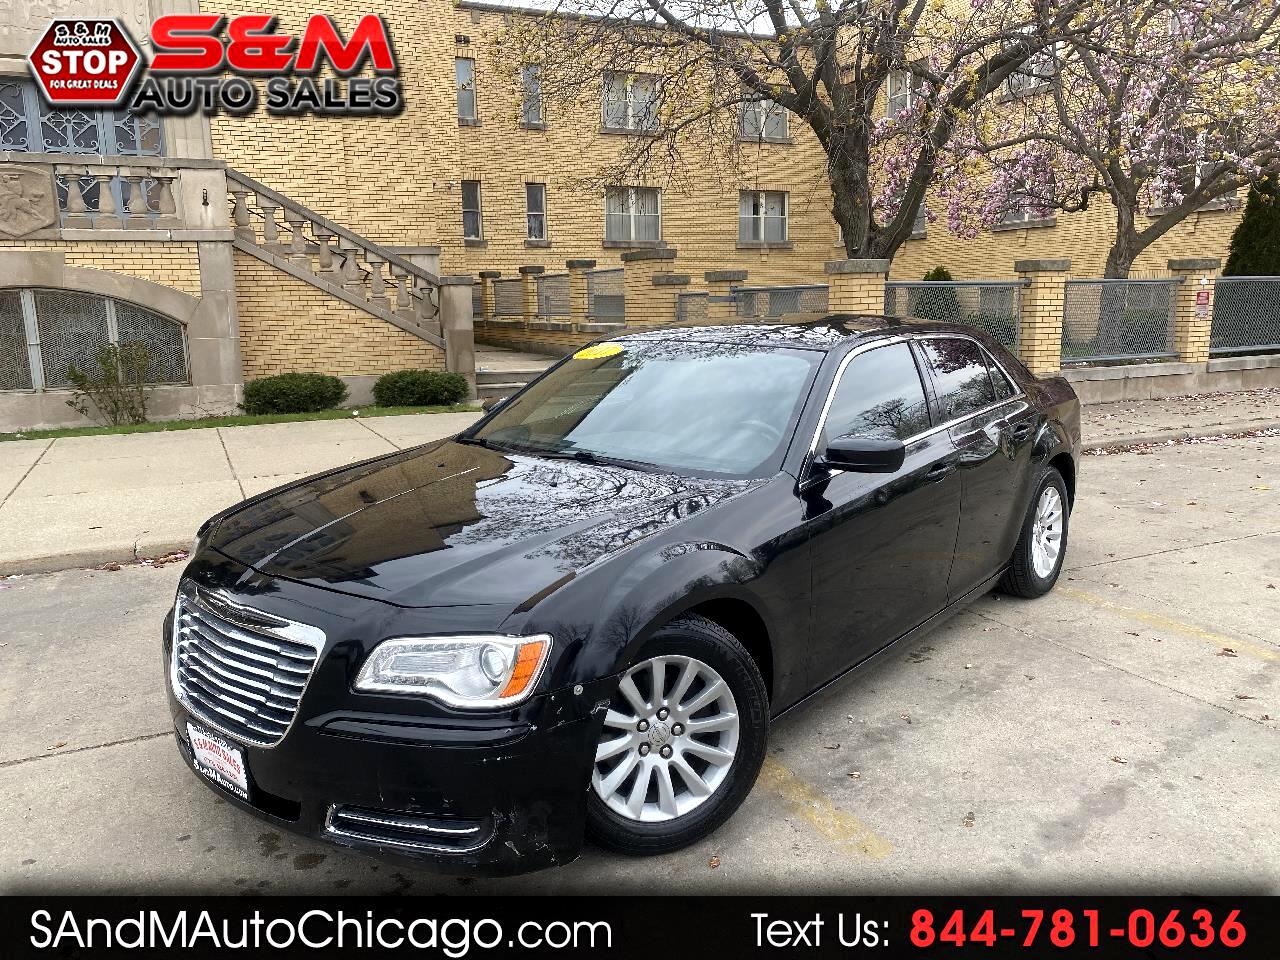 Used Chrysler 300 Chicago Il